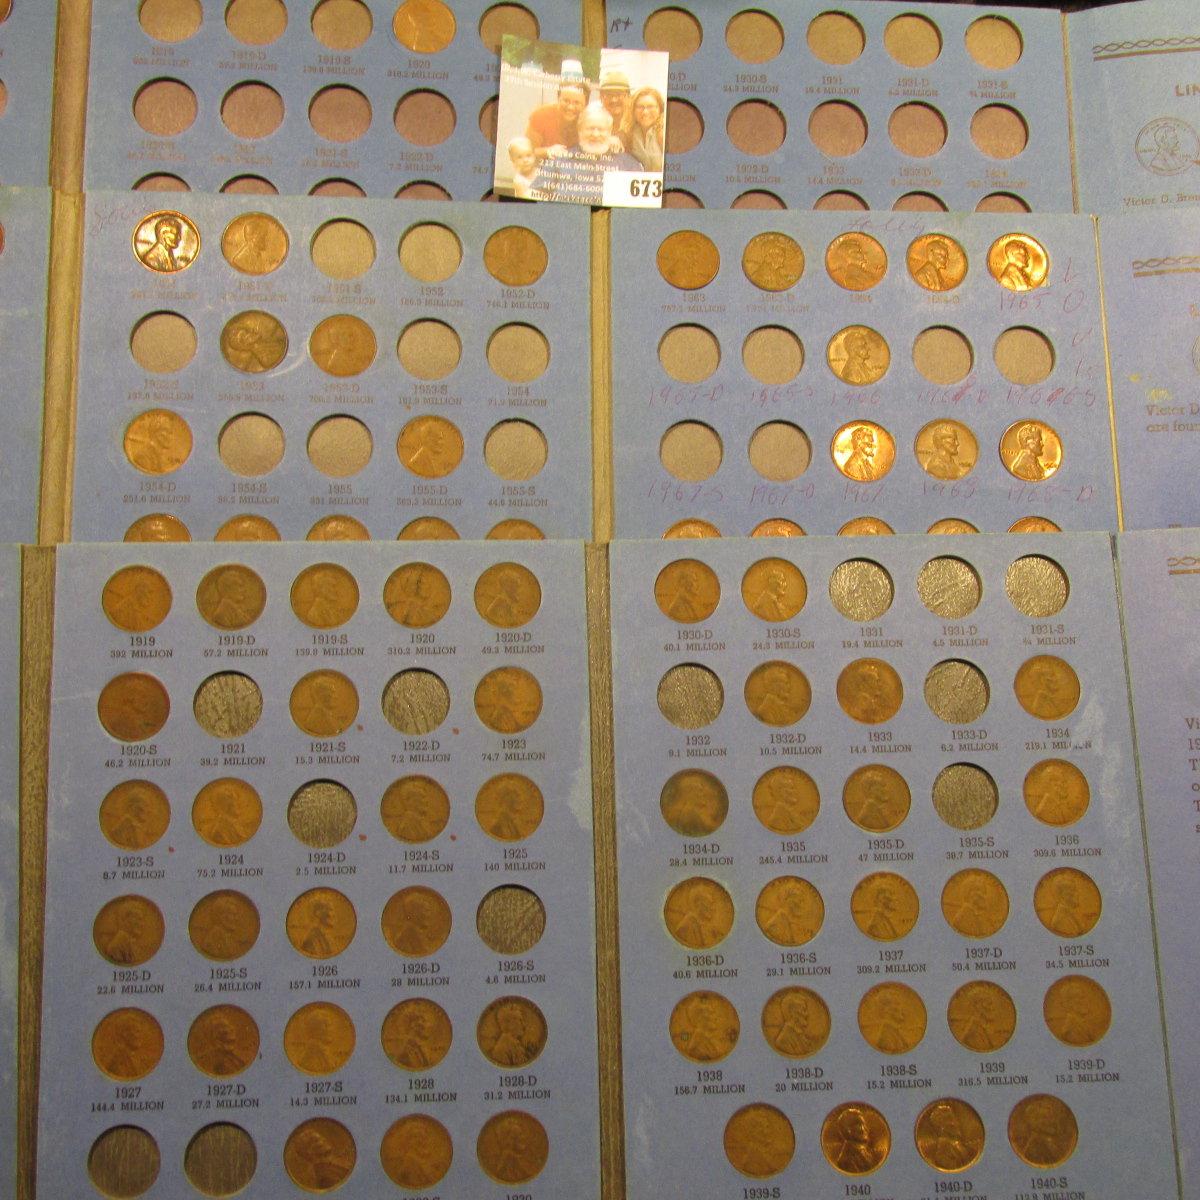 (3) Whitman coin folders with Lincoln cents dating back to 1909 P VDB up to 72, includes some high g